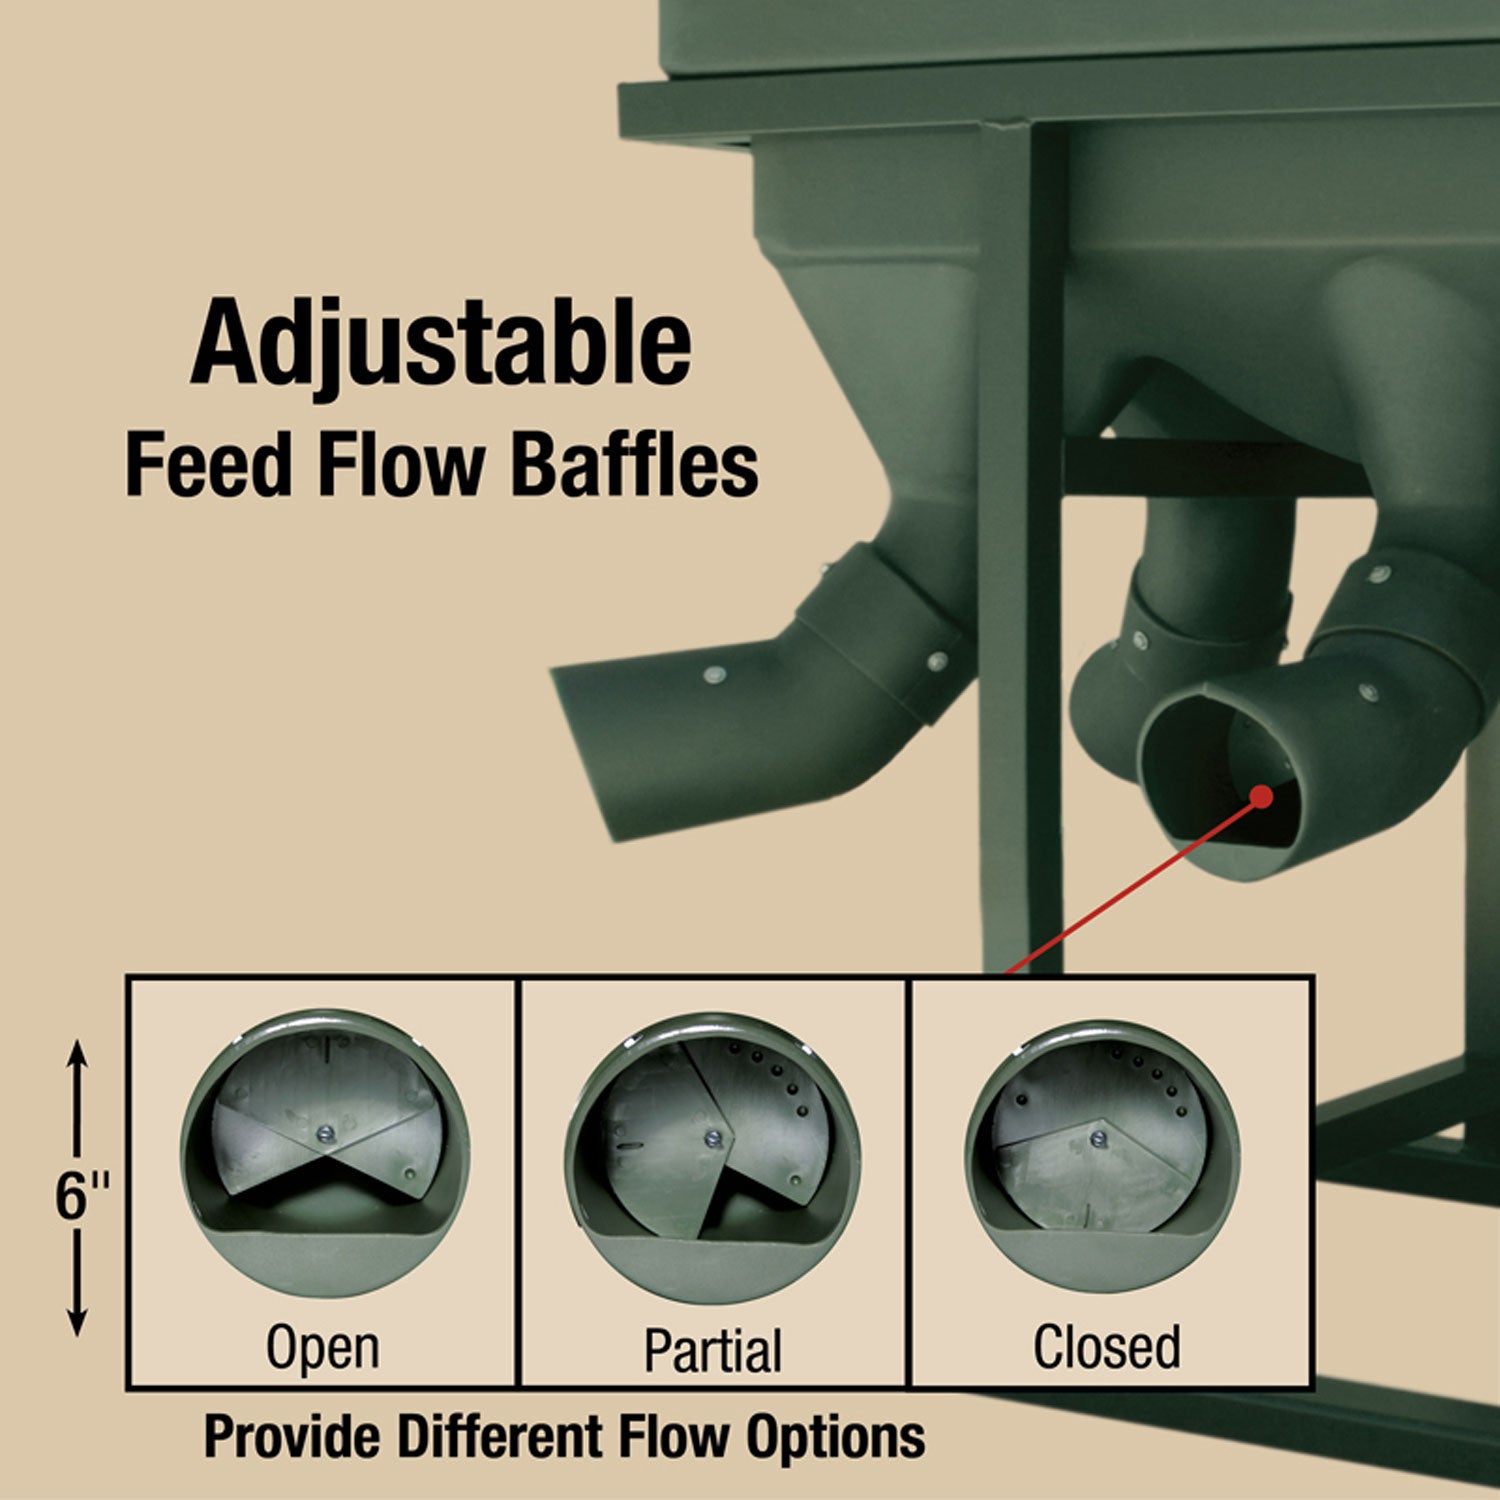 XPF2000F: Texas Hunter 2,000 lb. Xtreme Deer Fawn and Doe Protein Feeder